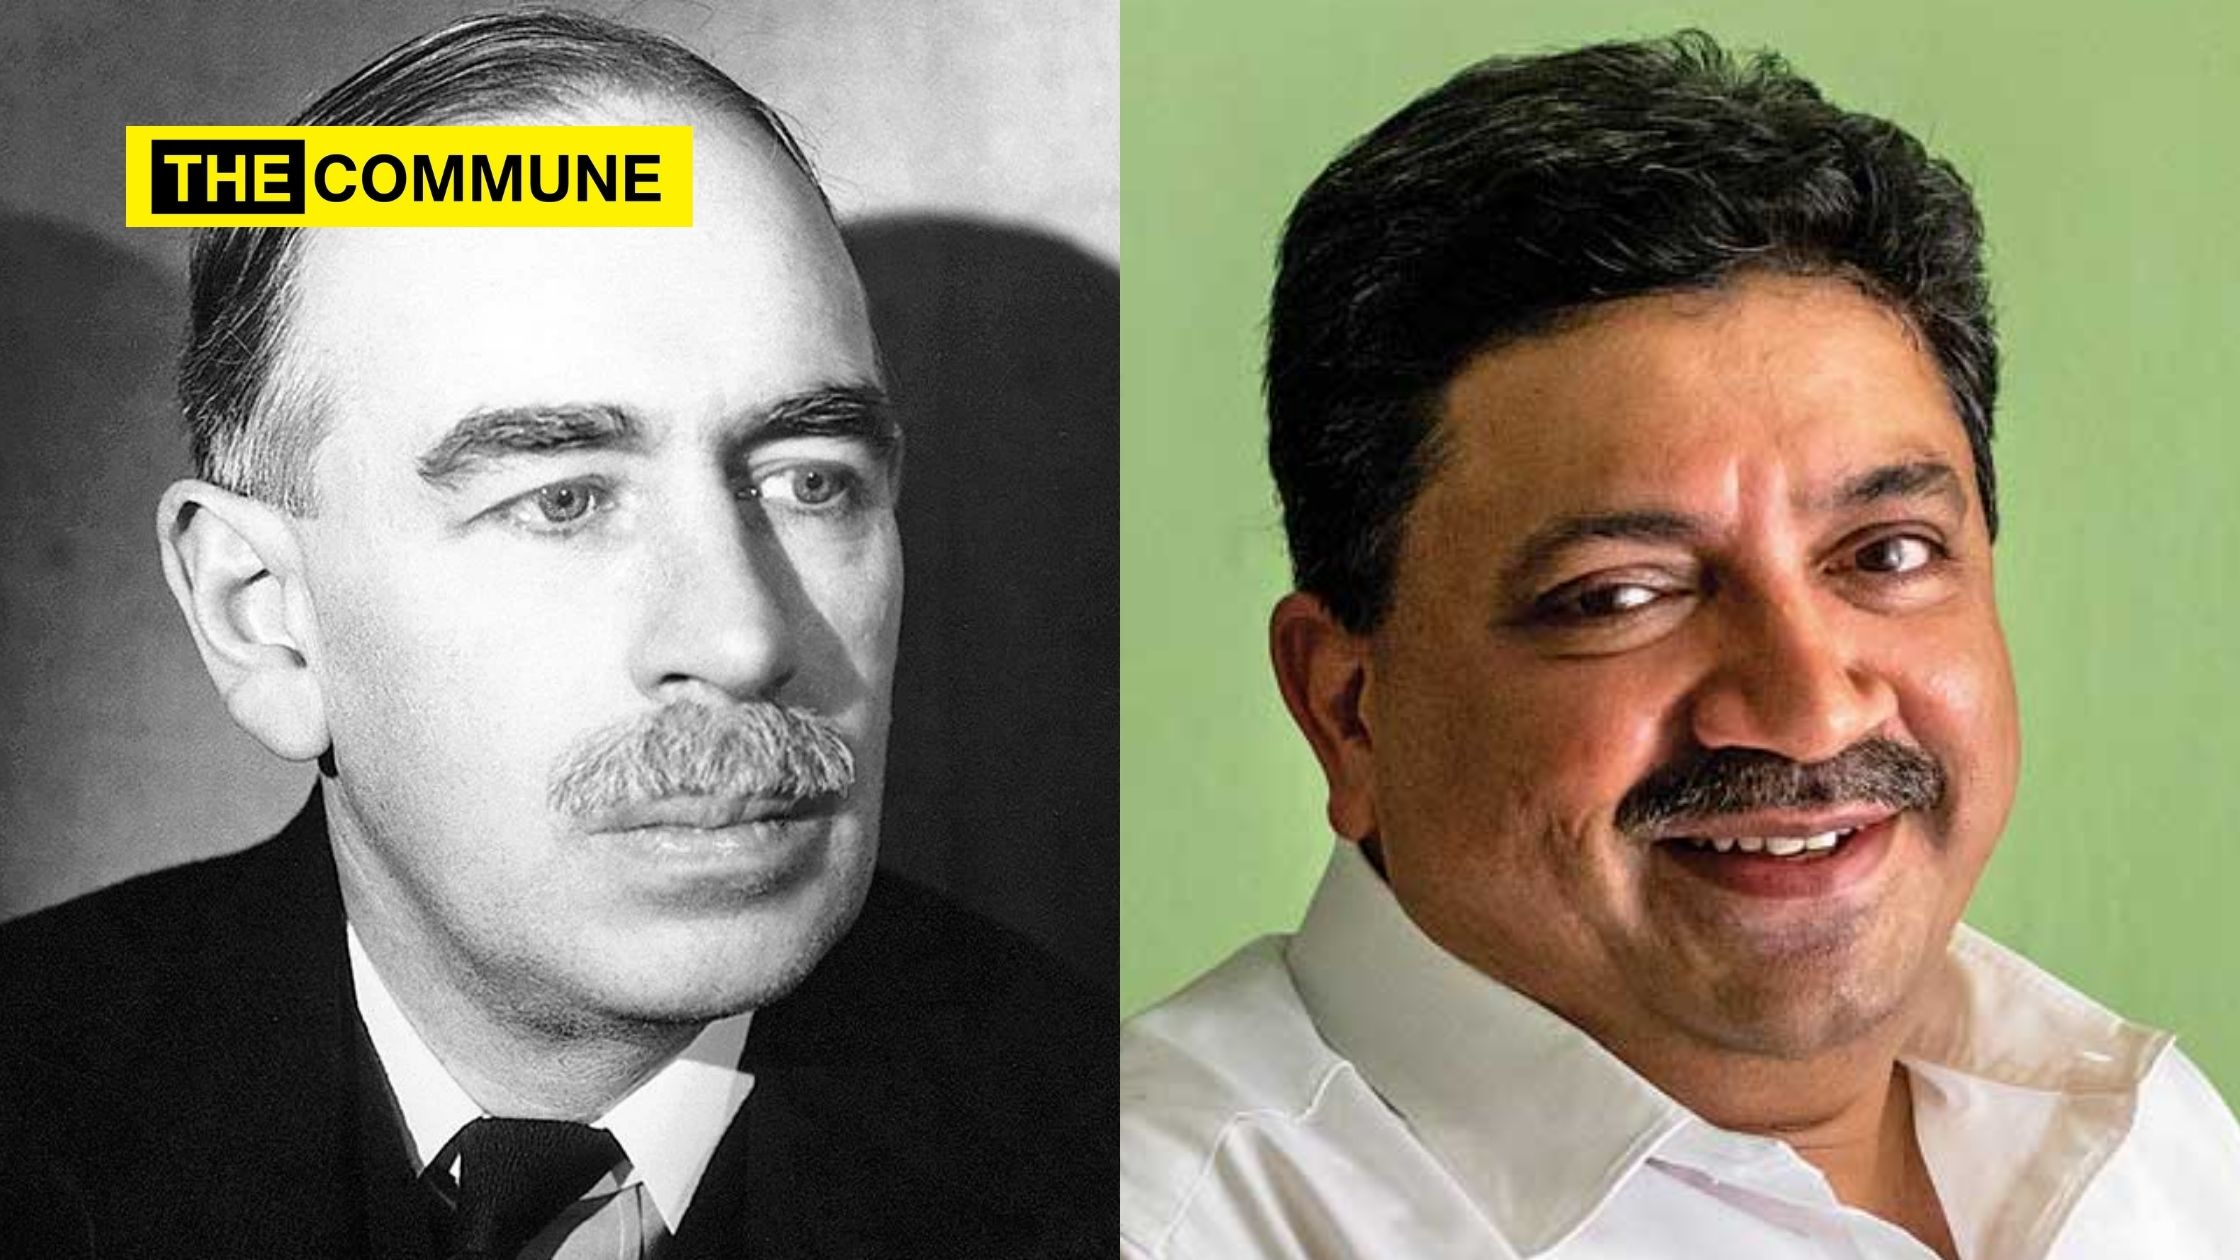 Mit Educated And Highly Accomplished Tn Fin Min Ptr Says Keynes Won Nobel Prize The Commune